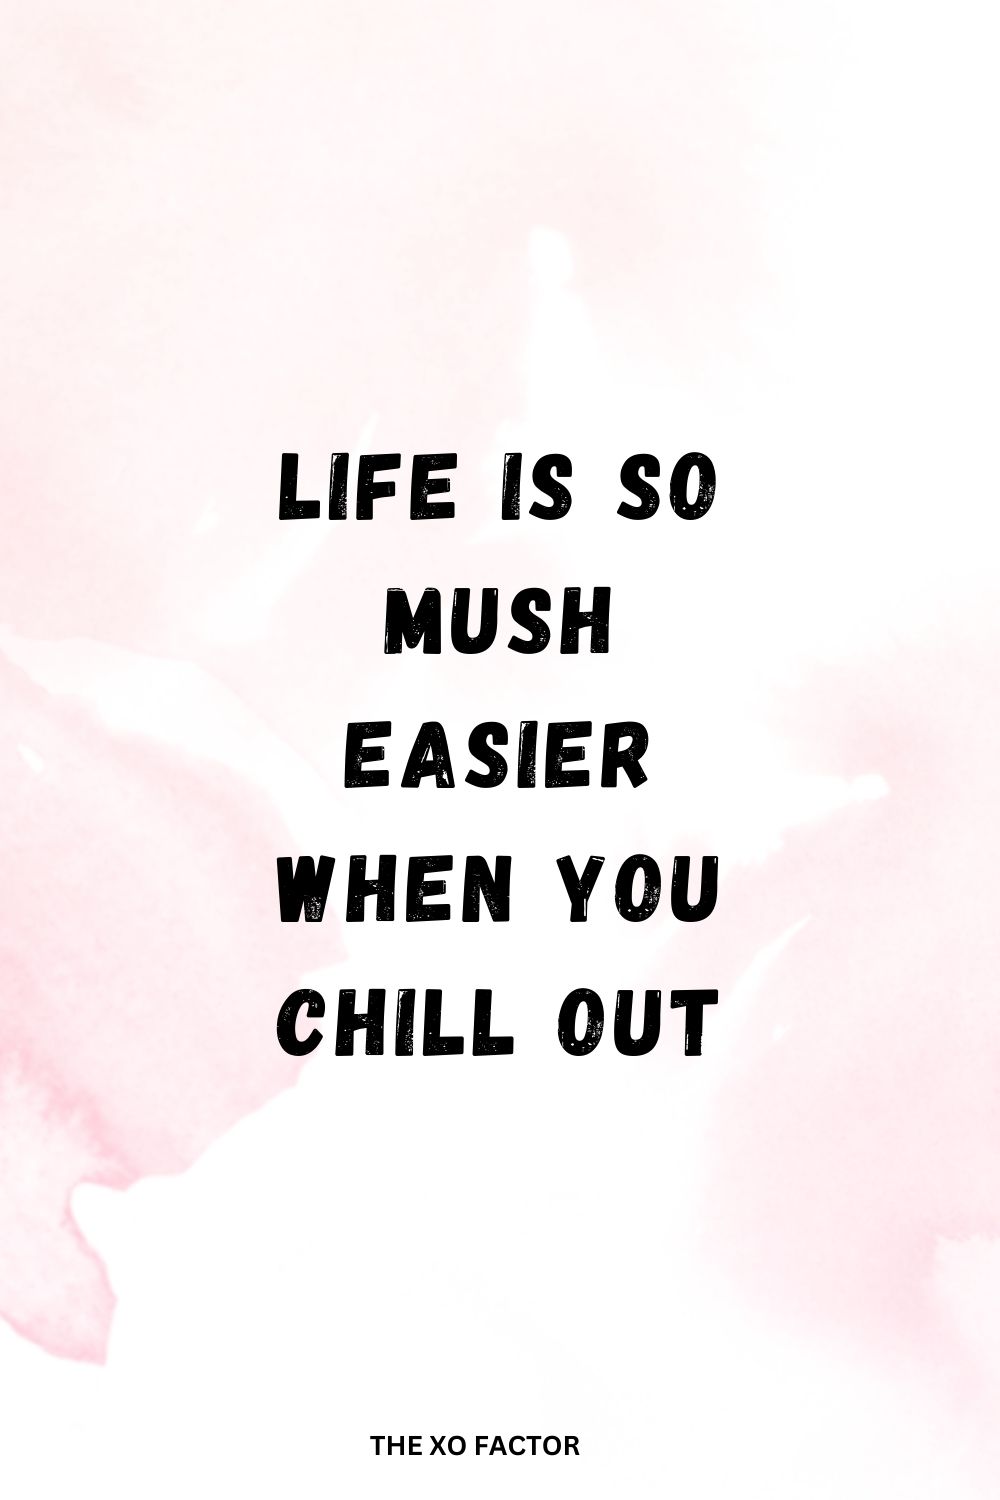 Life is so mush easier when you chill out